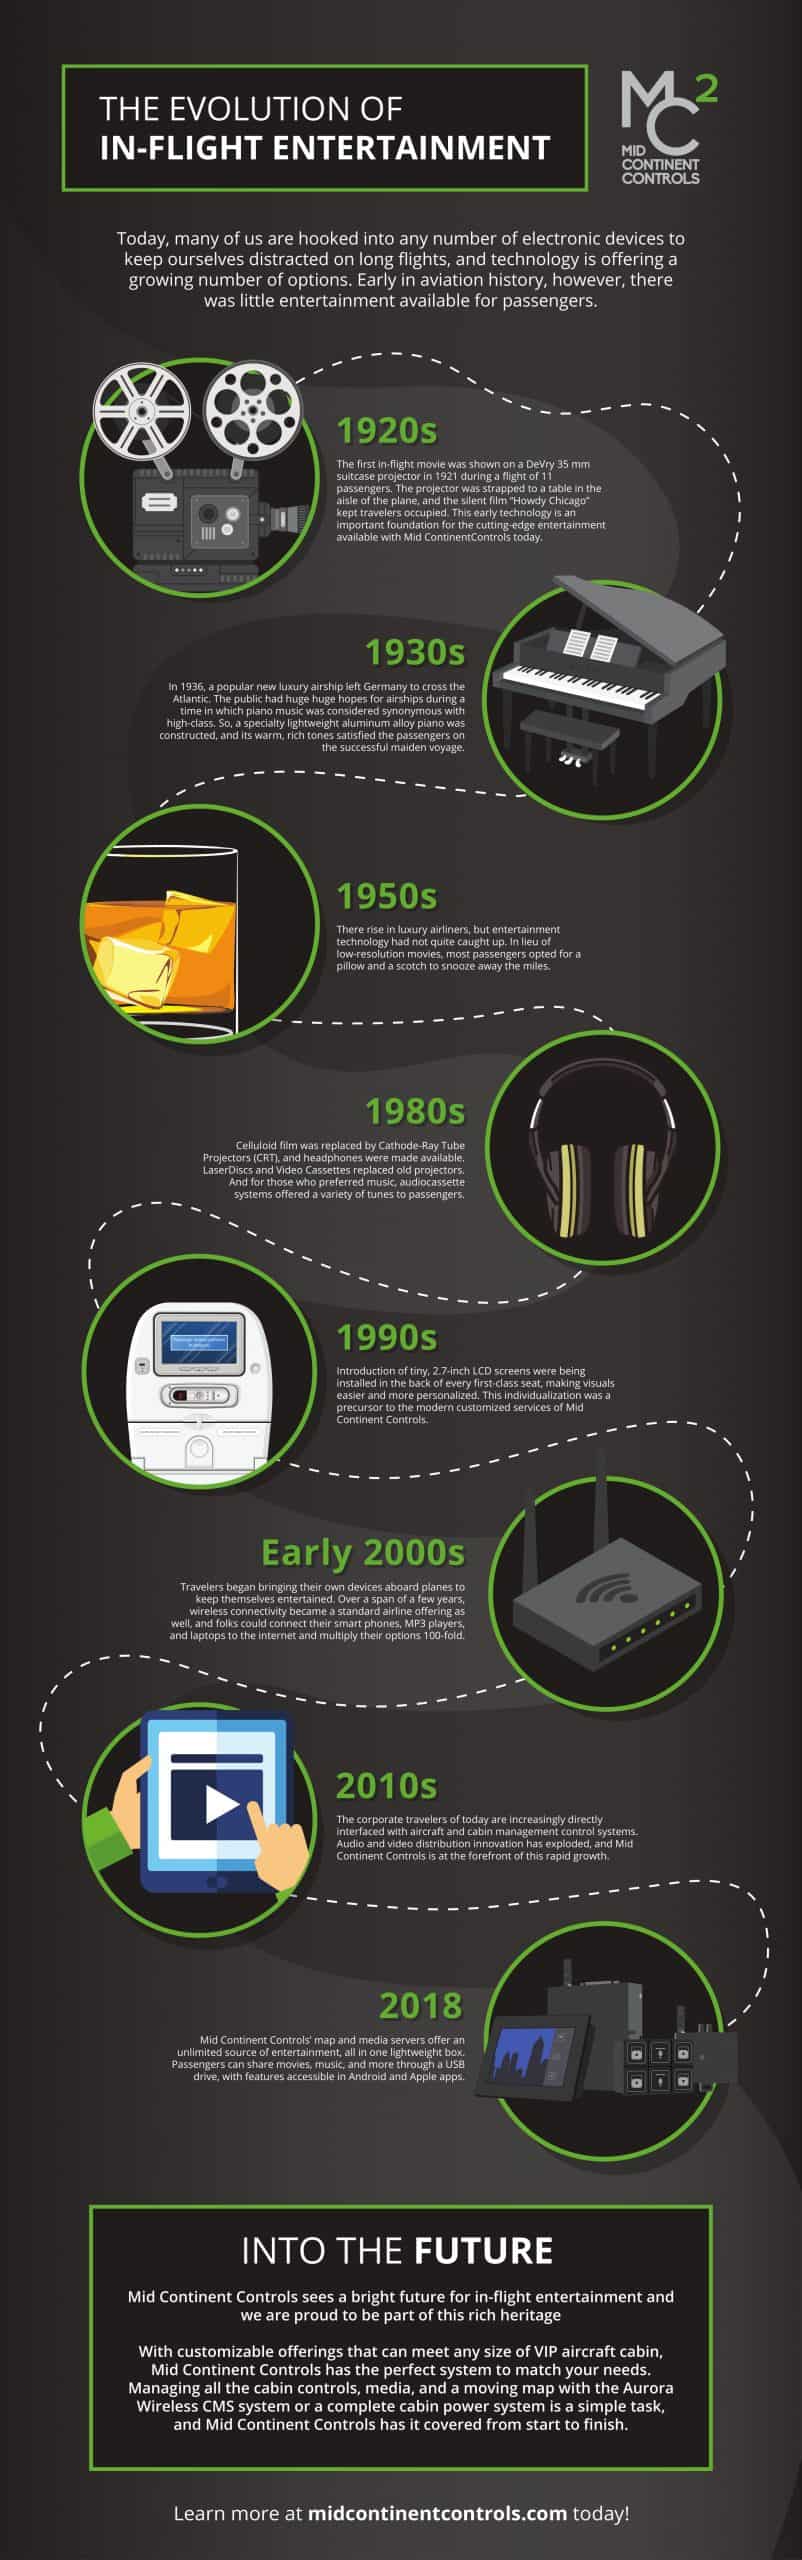 This shows the evolution of in-flight entertainment from the beginning until present